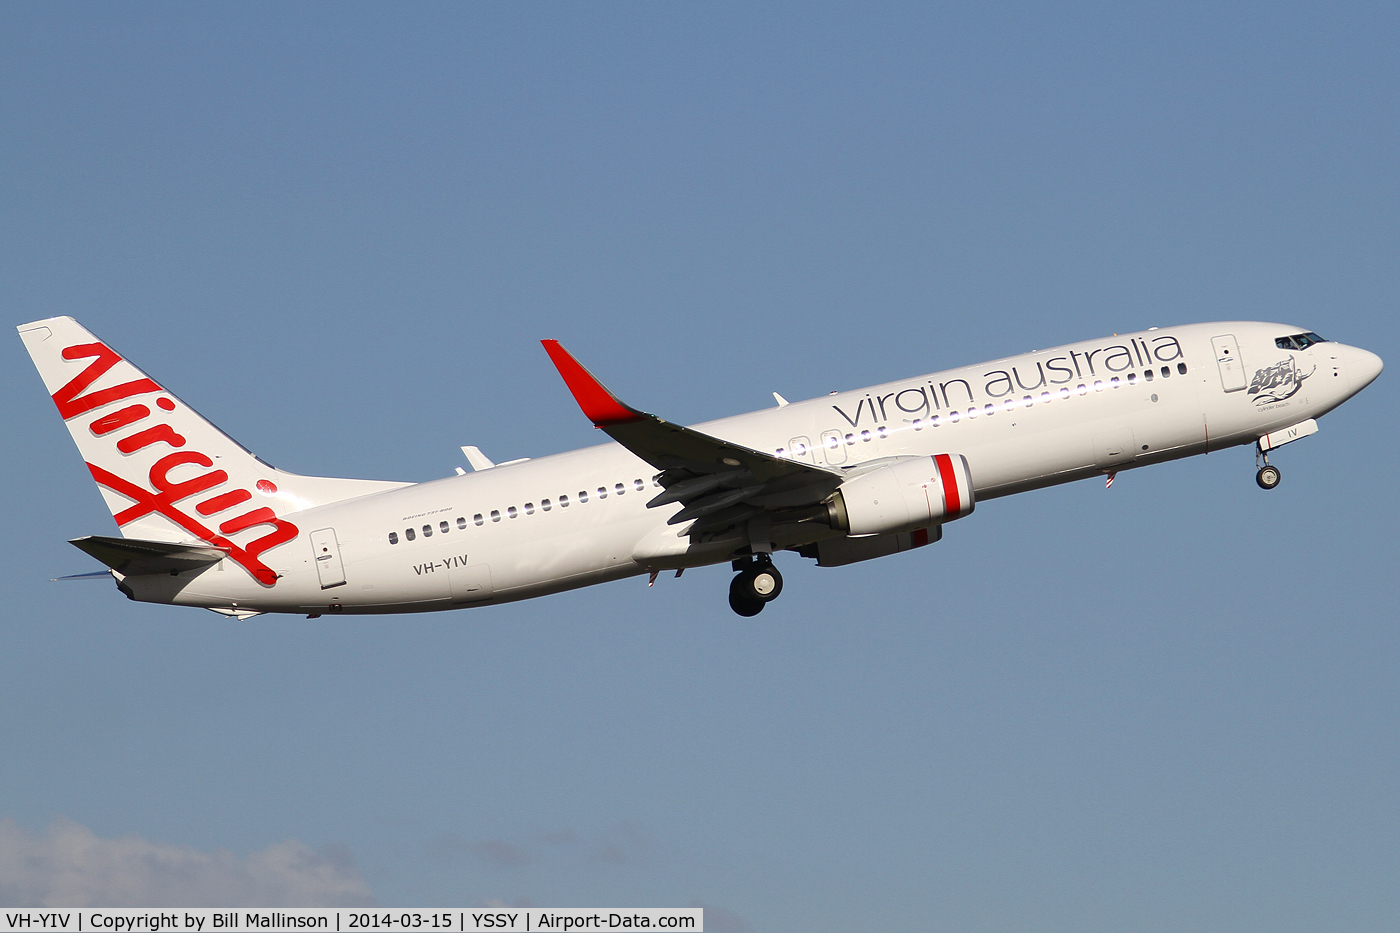 VH-YIV, 2013 Boeing 737-8FE C/N 40698, away into the blue